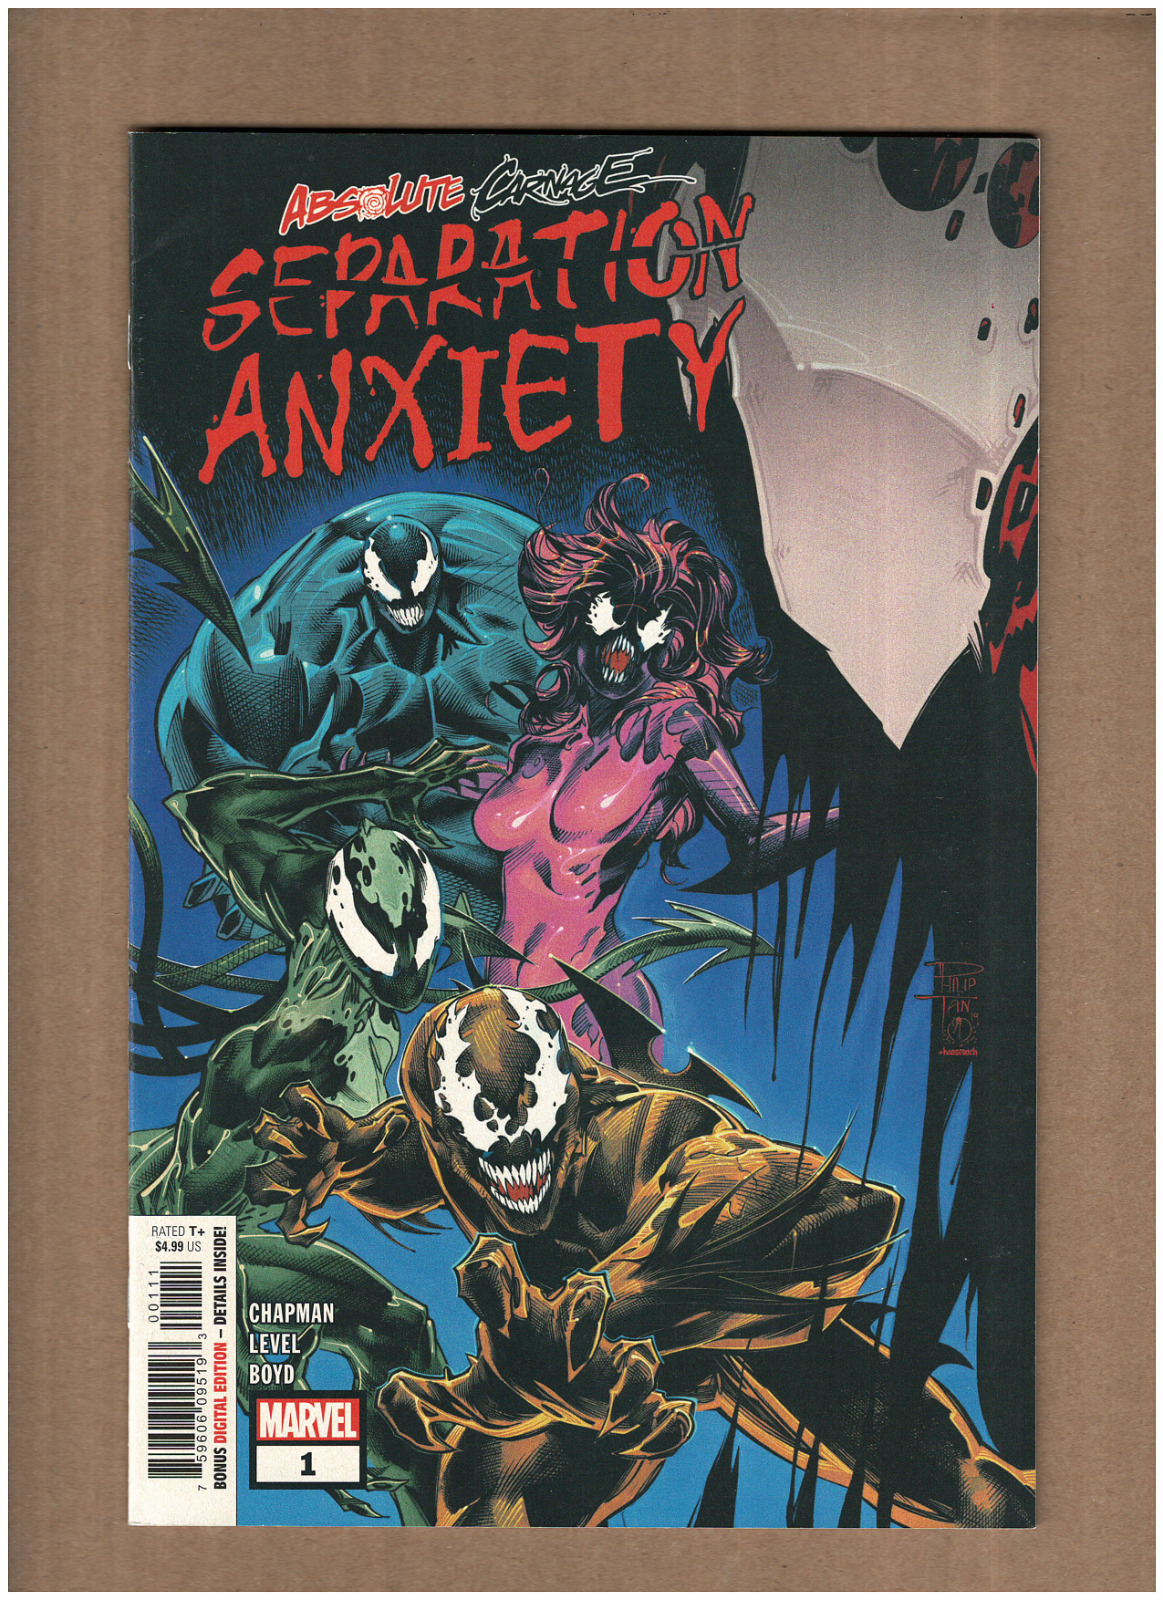 Absolute Carnage: Separation Anxiety#1 Marvel Comics 2019 VF/NM 9.0